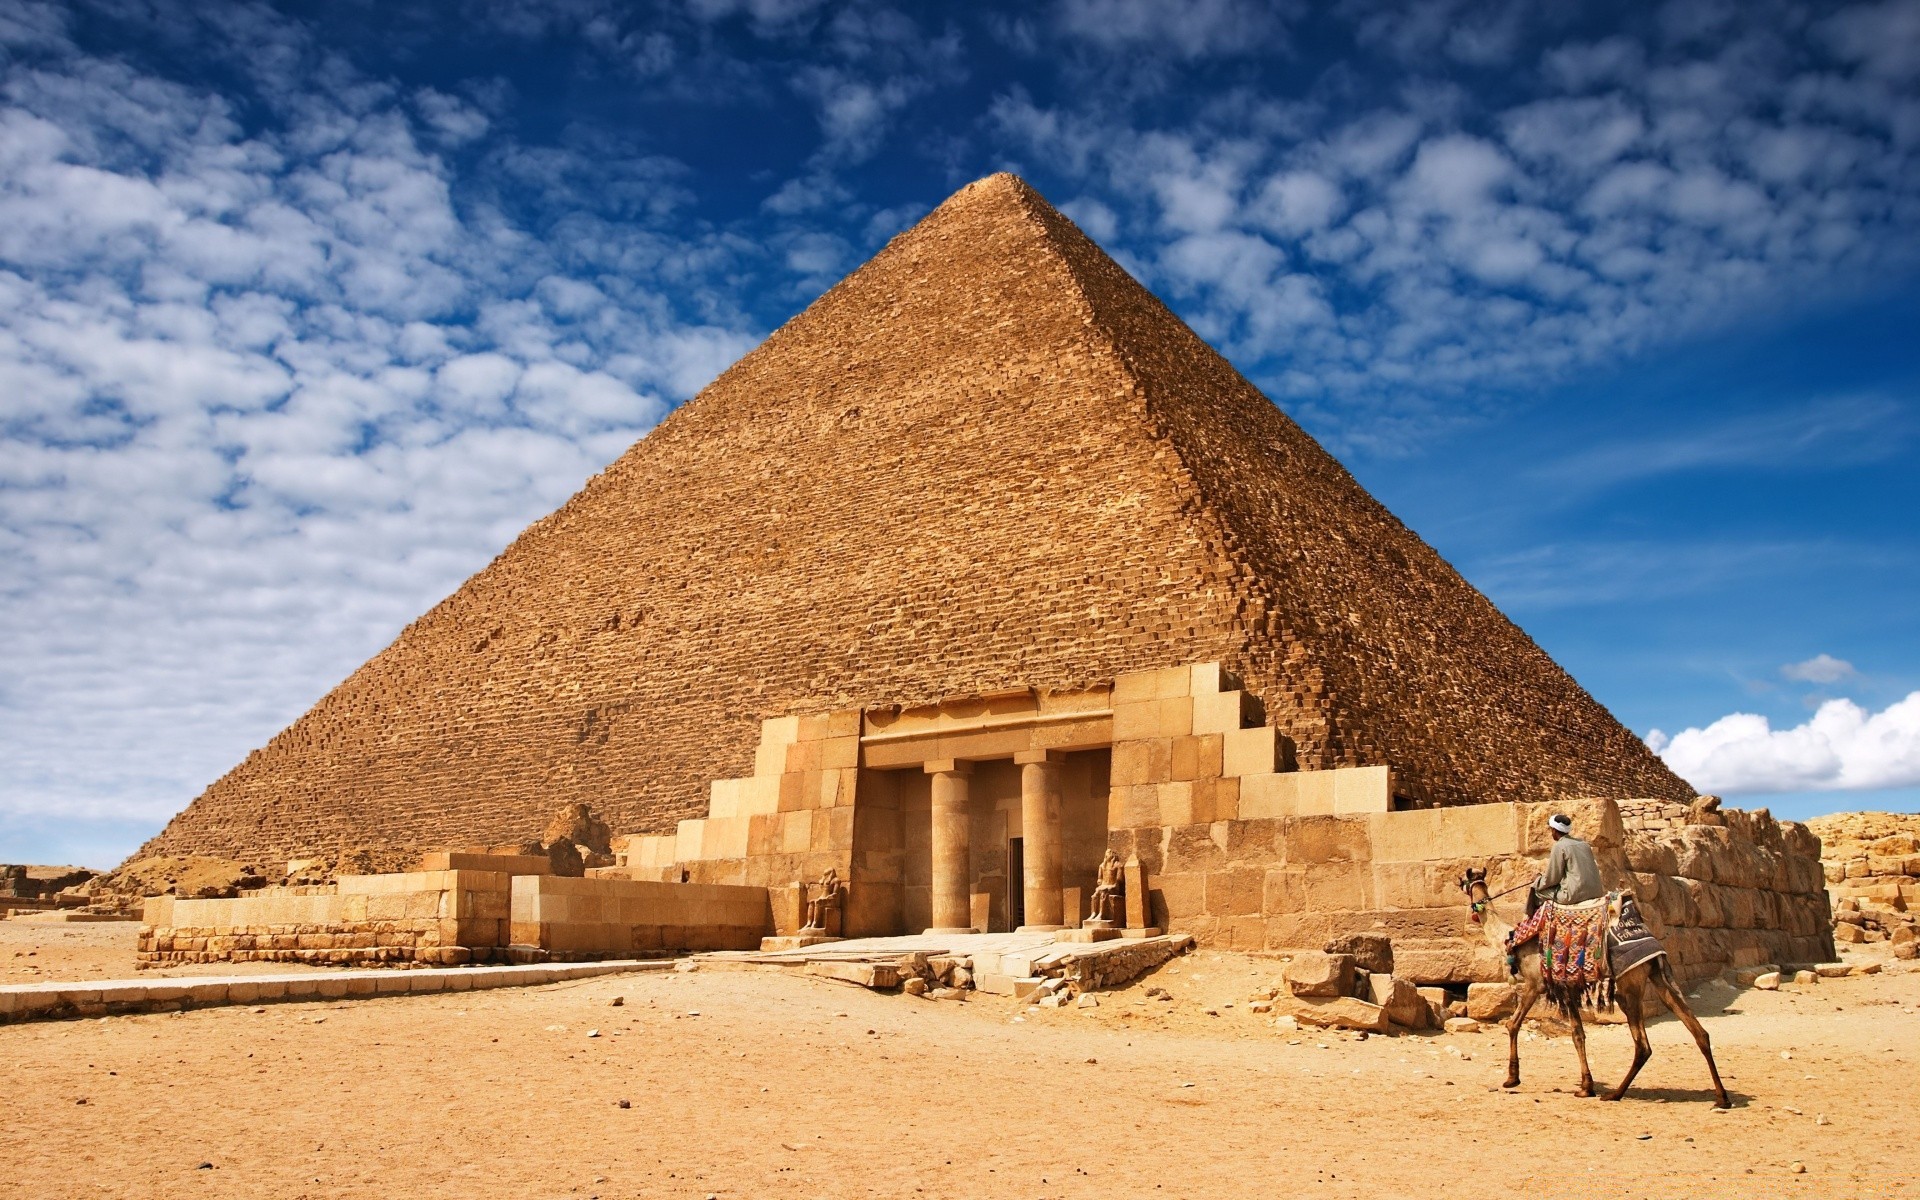 africa pyramid pharaoh desert camel archaeology grave sphinx sand ancient travel bedouin architecture ruin nile outdoors mausoleum tourism temple stone